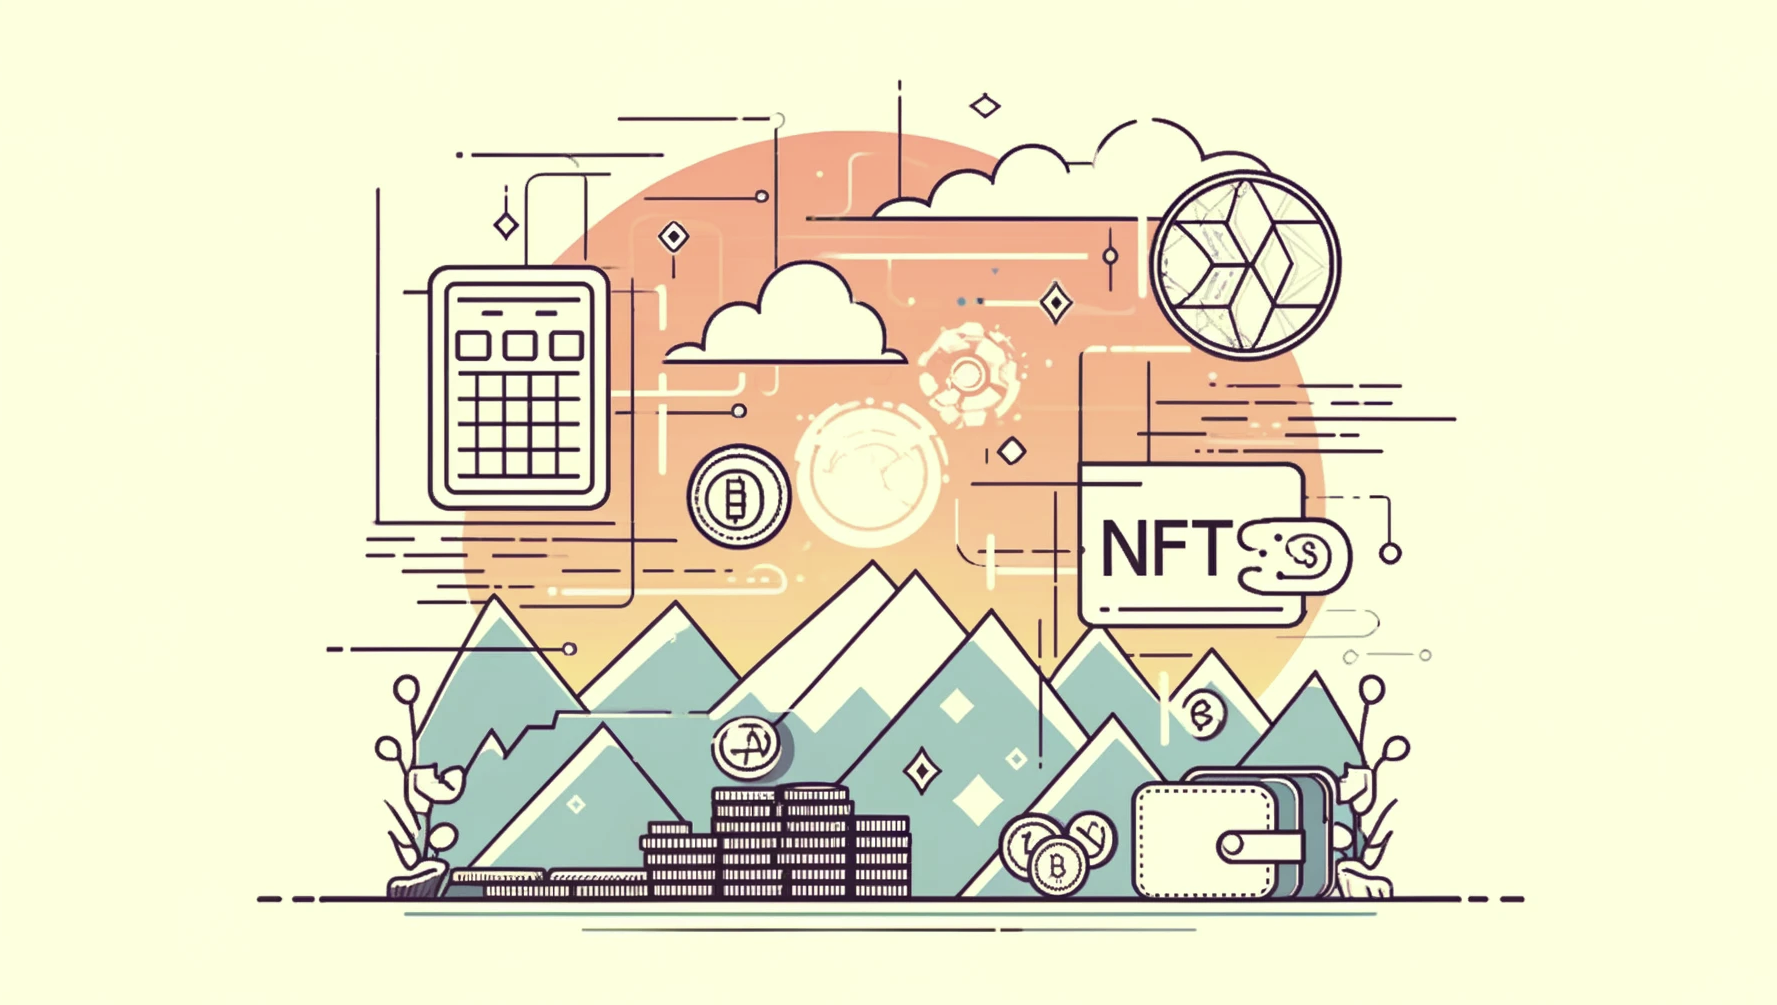 "NFT" text surrounded by transfer animations, coins, and wallets.